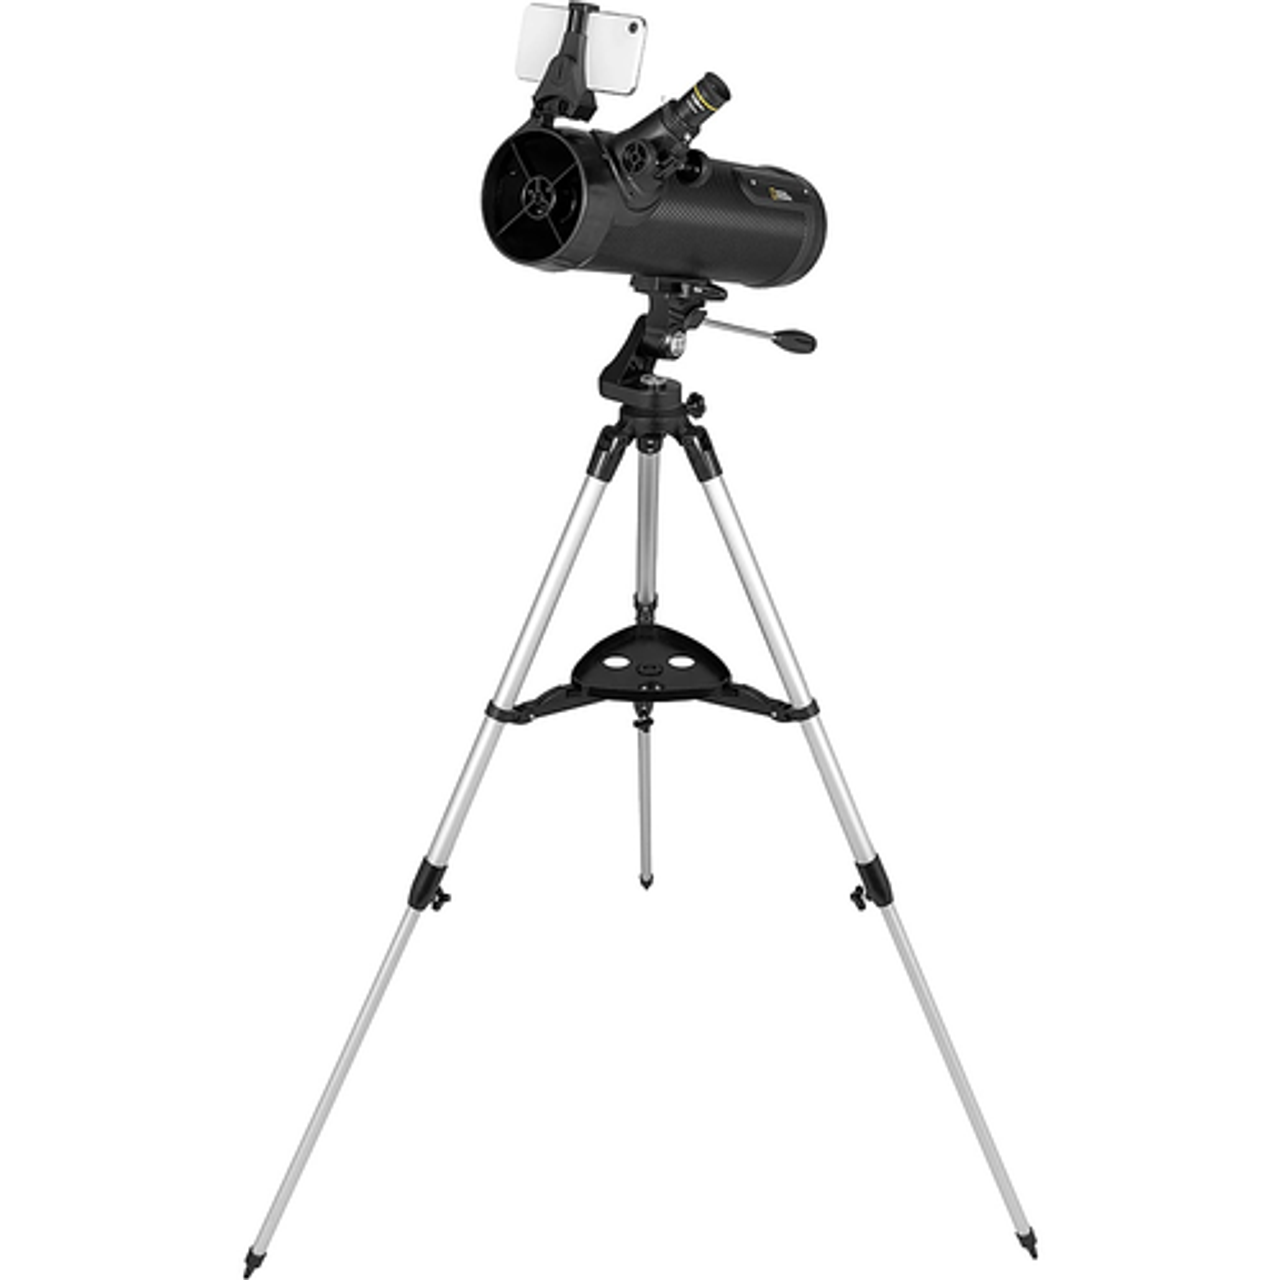 National Geographic - 114mm Reflector Telescope with Astronomy App